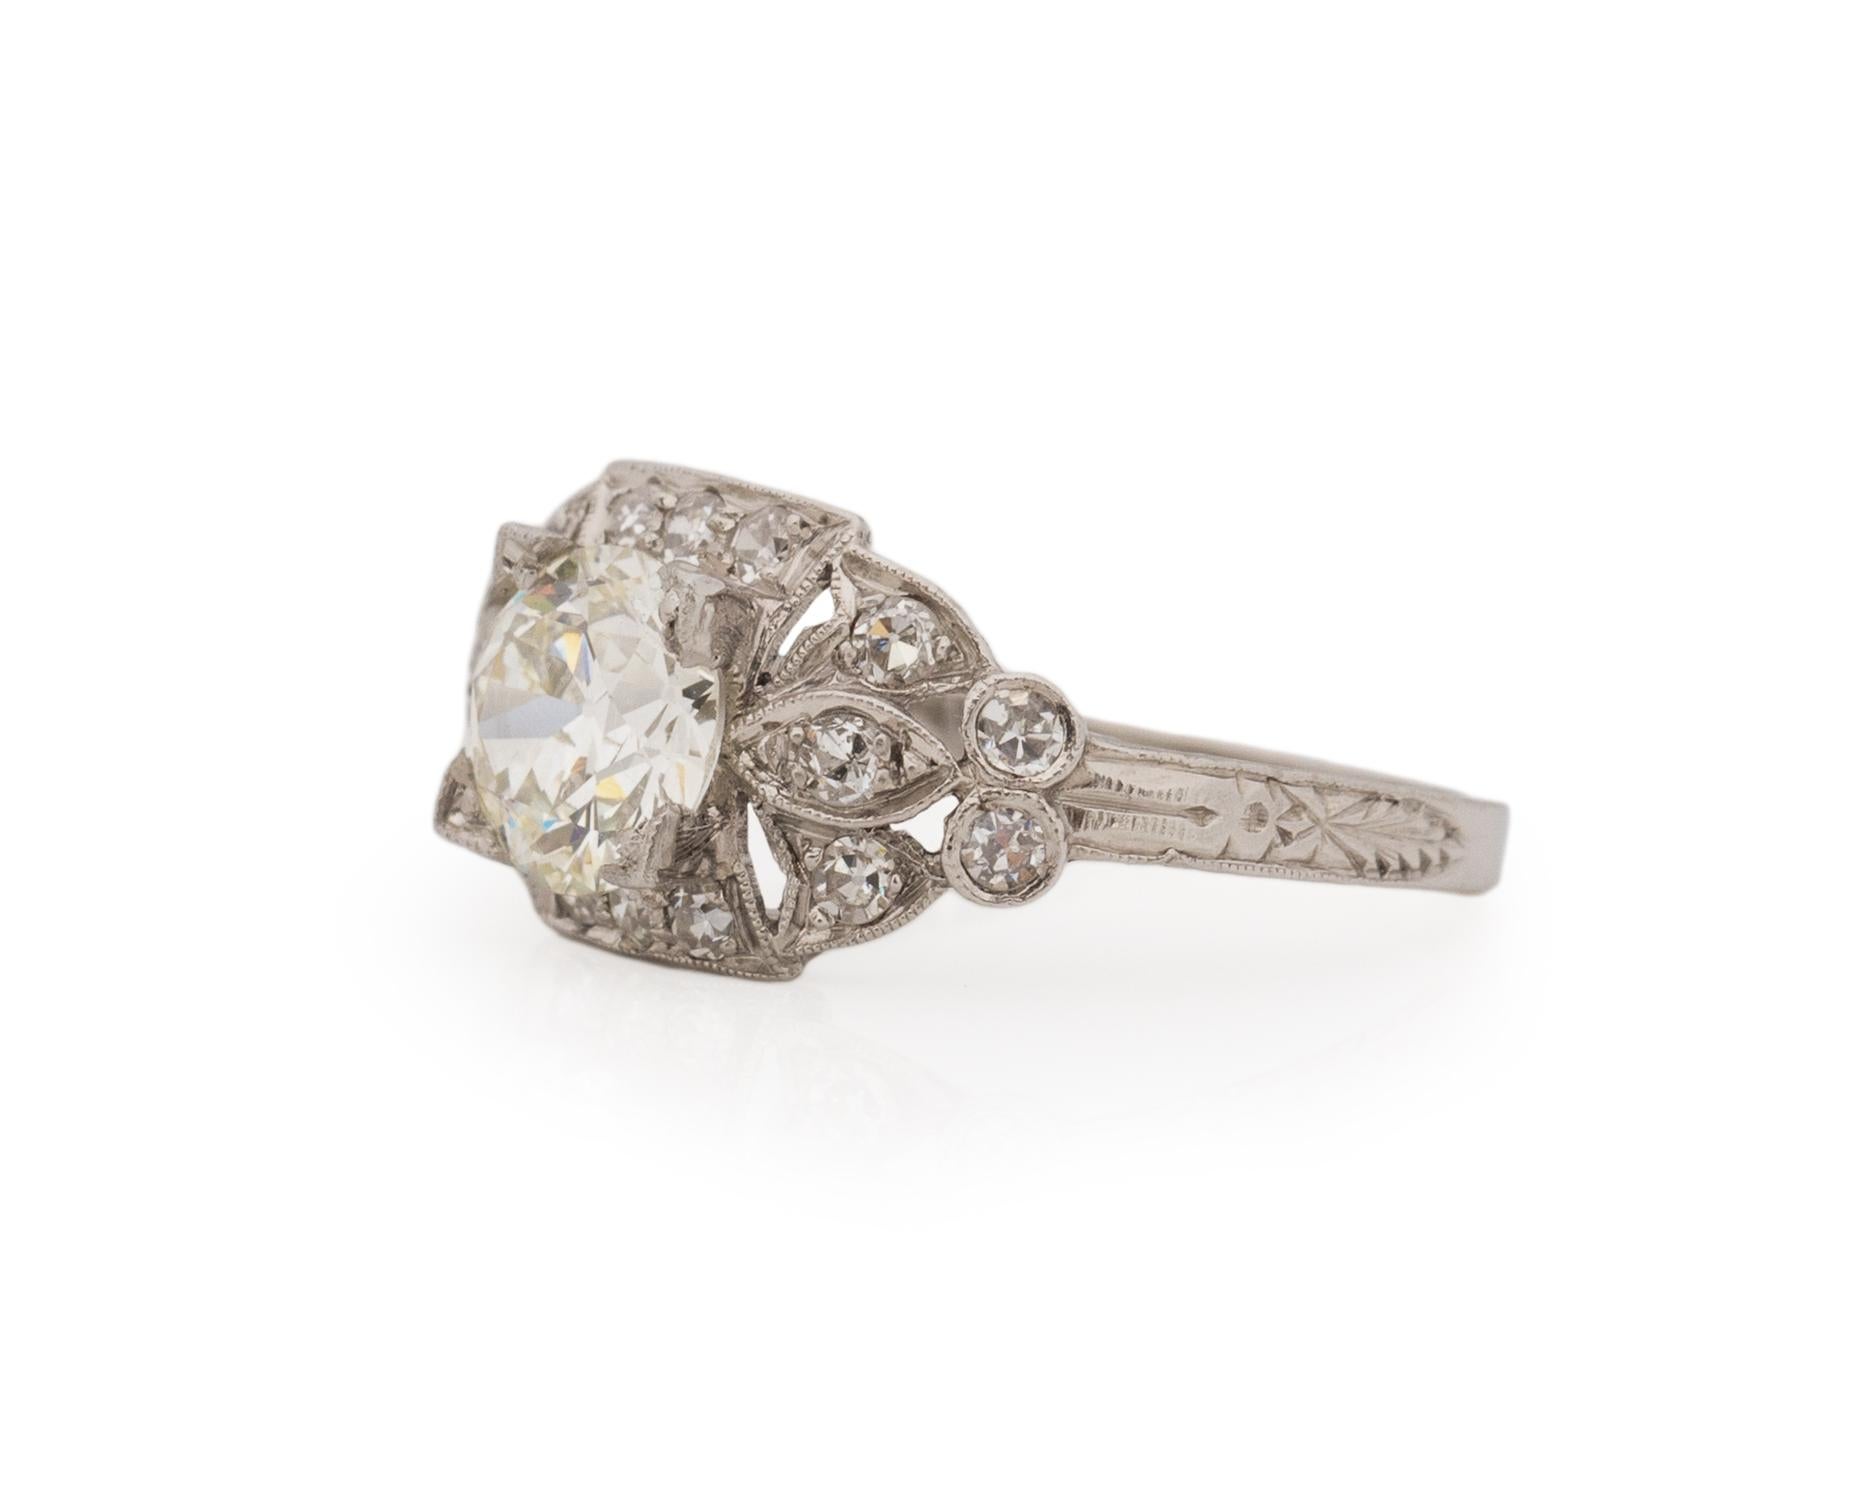 Ring Size: 6.5
Metal Type: Platinum [Hallmarked, and Tested]
Weight: 3.5 grams

Diamond Details:
GIA REPORT #: 2225420629
Weight: 1.17ct, total weight
Cut: Old European brilliant
Color: L
Clarity: VS2
Measurements: 7.03mm x 6.91mm x 3.82mm

Finger